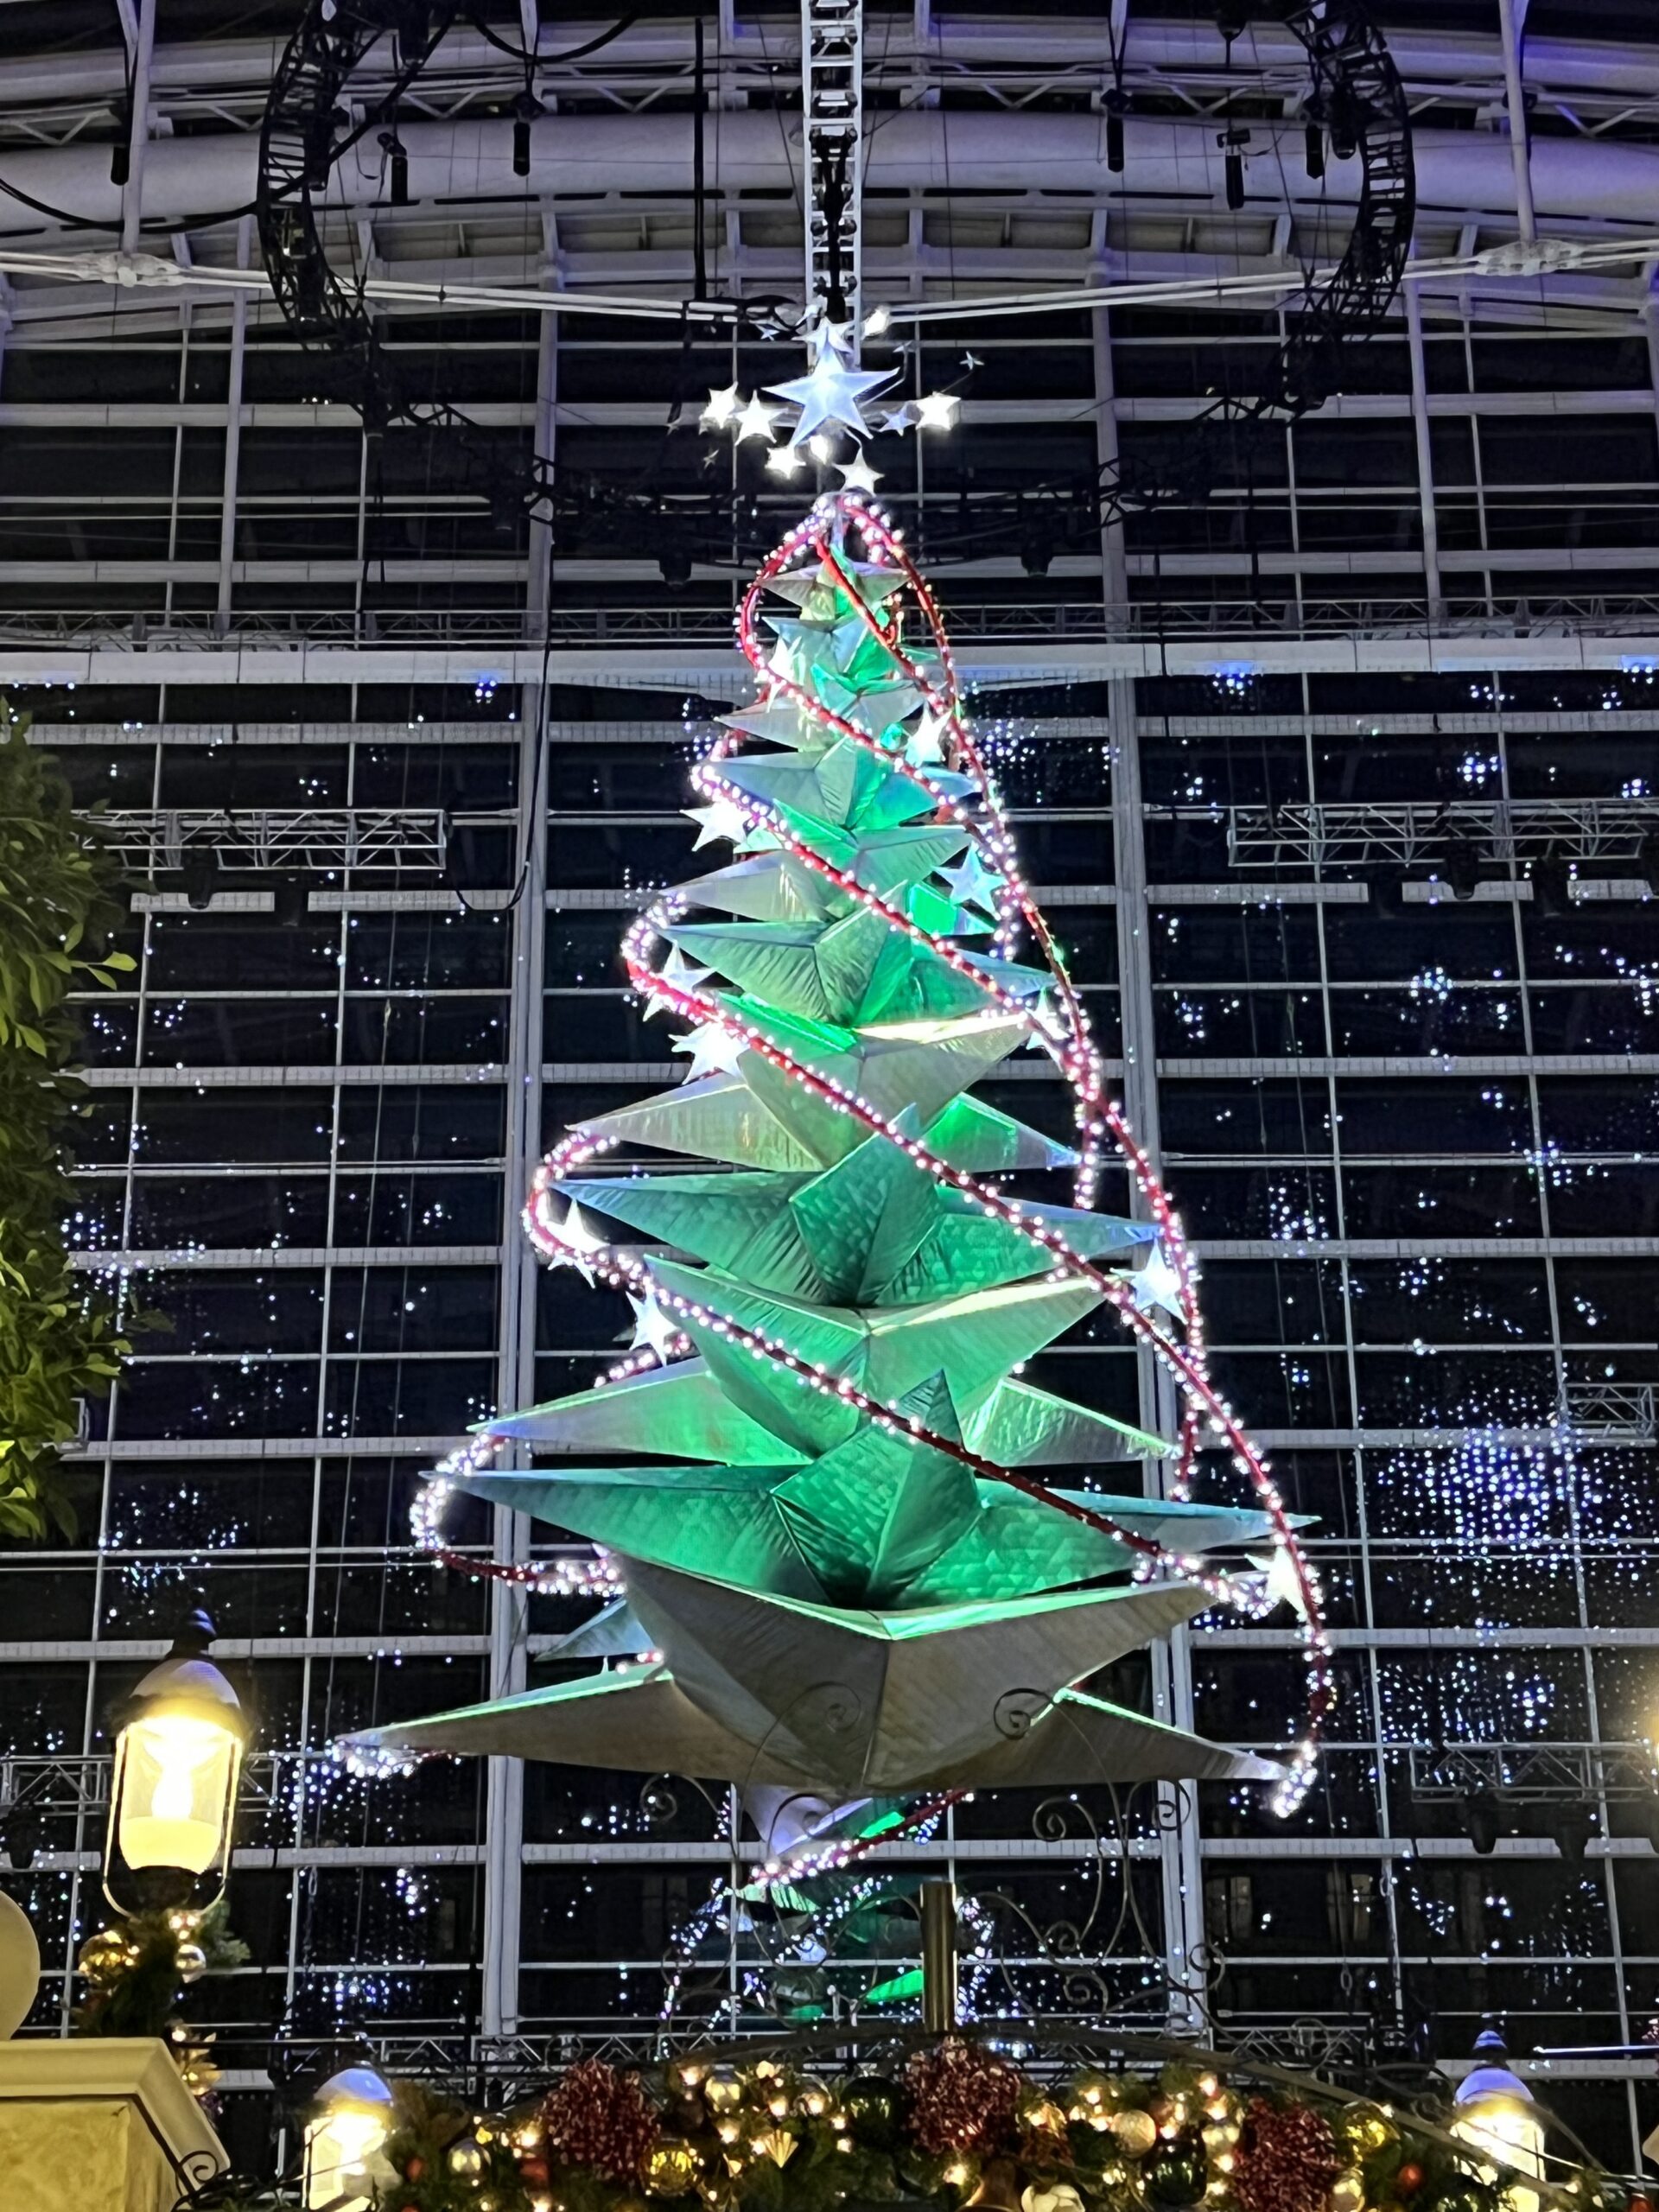 Hanging Christmas tree at Gaylord National Resort inside view portrait image